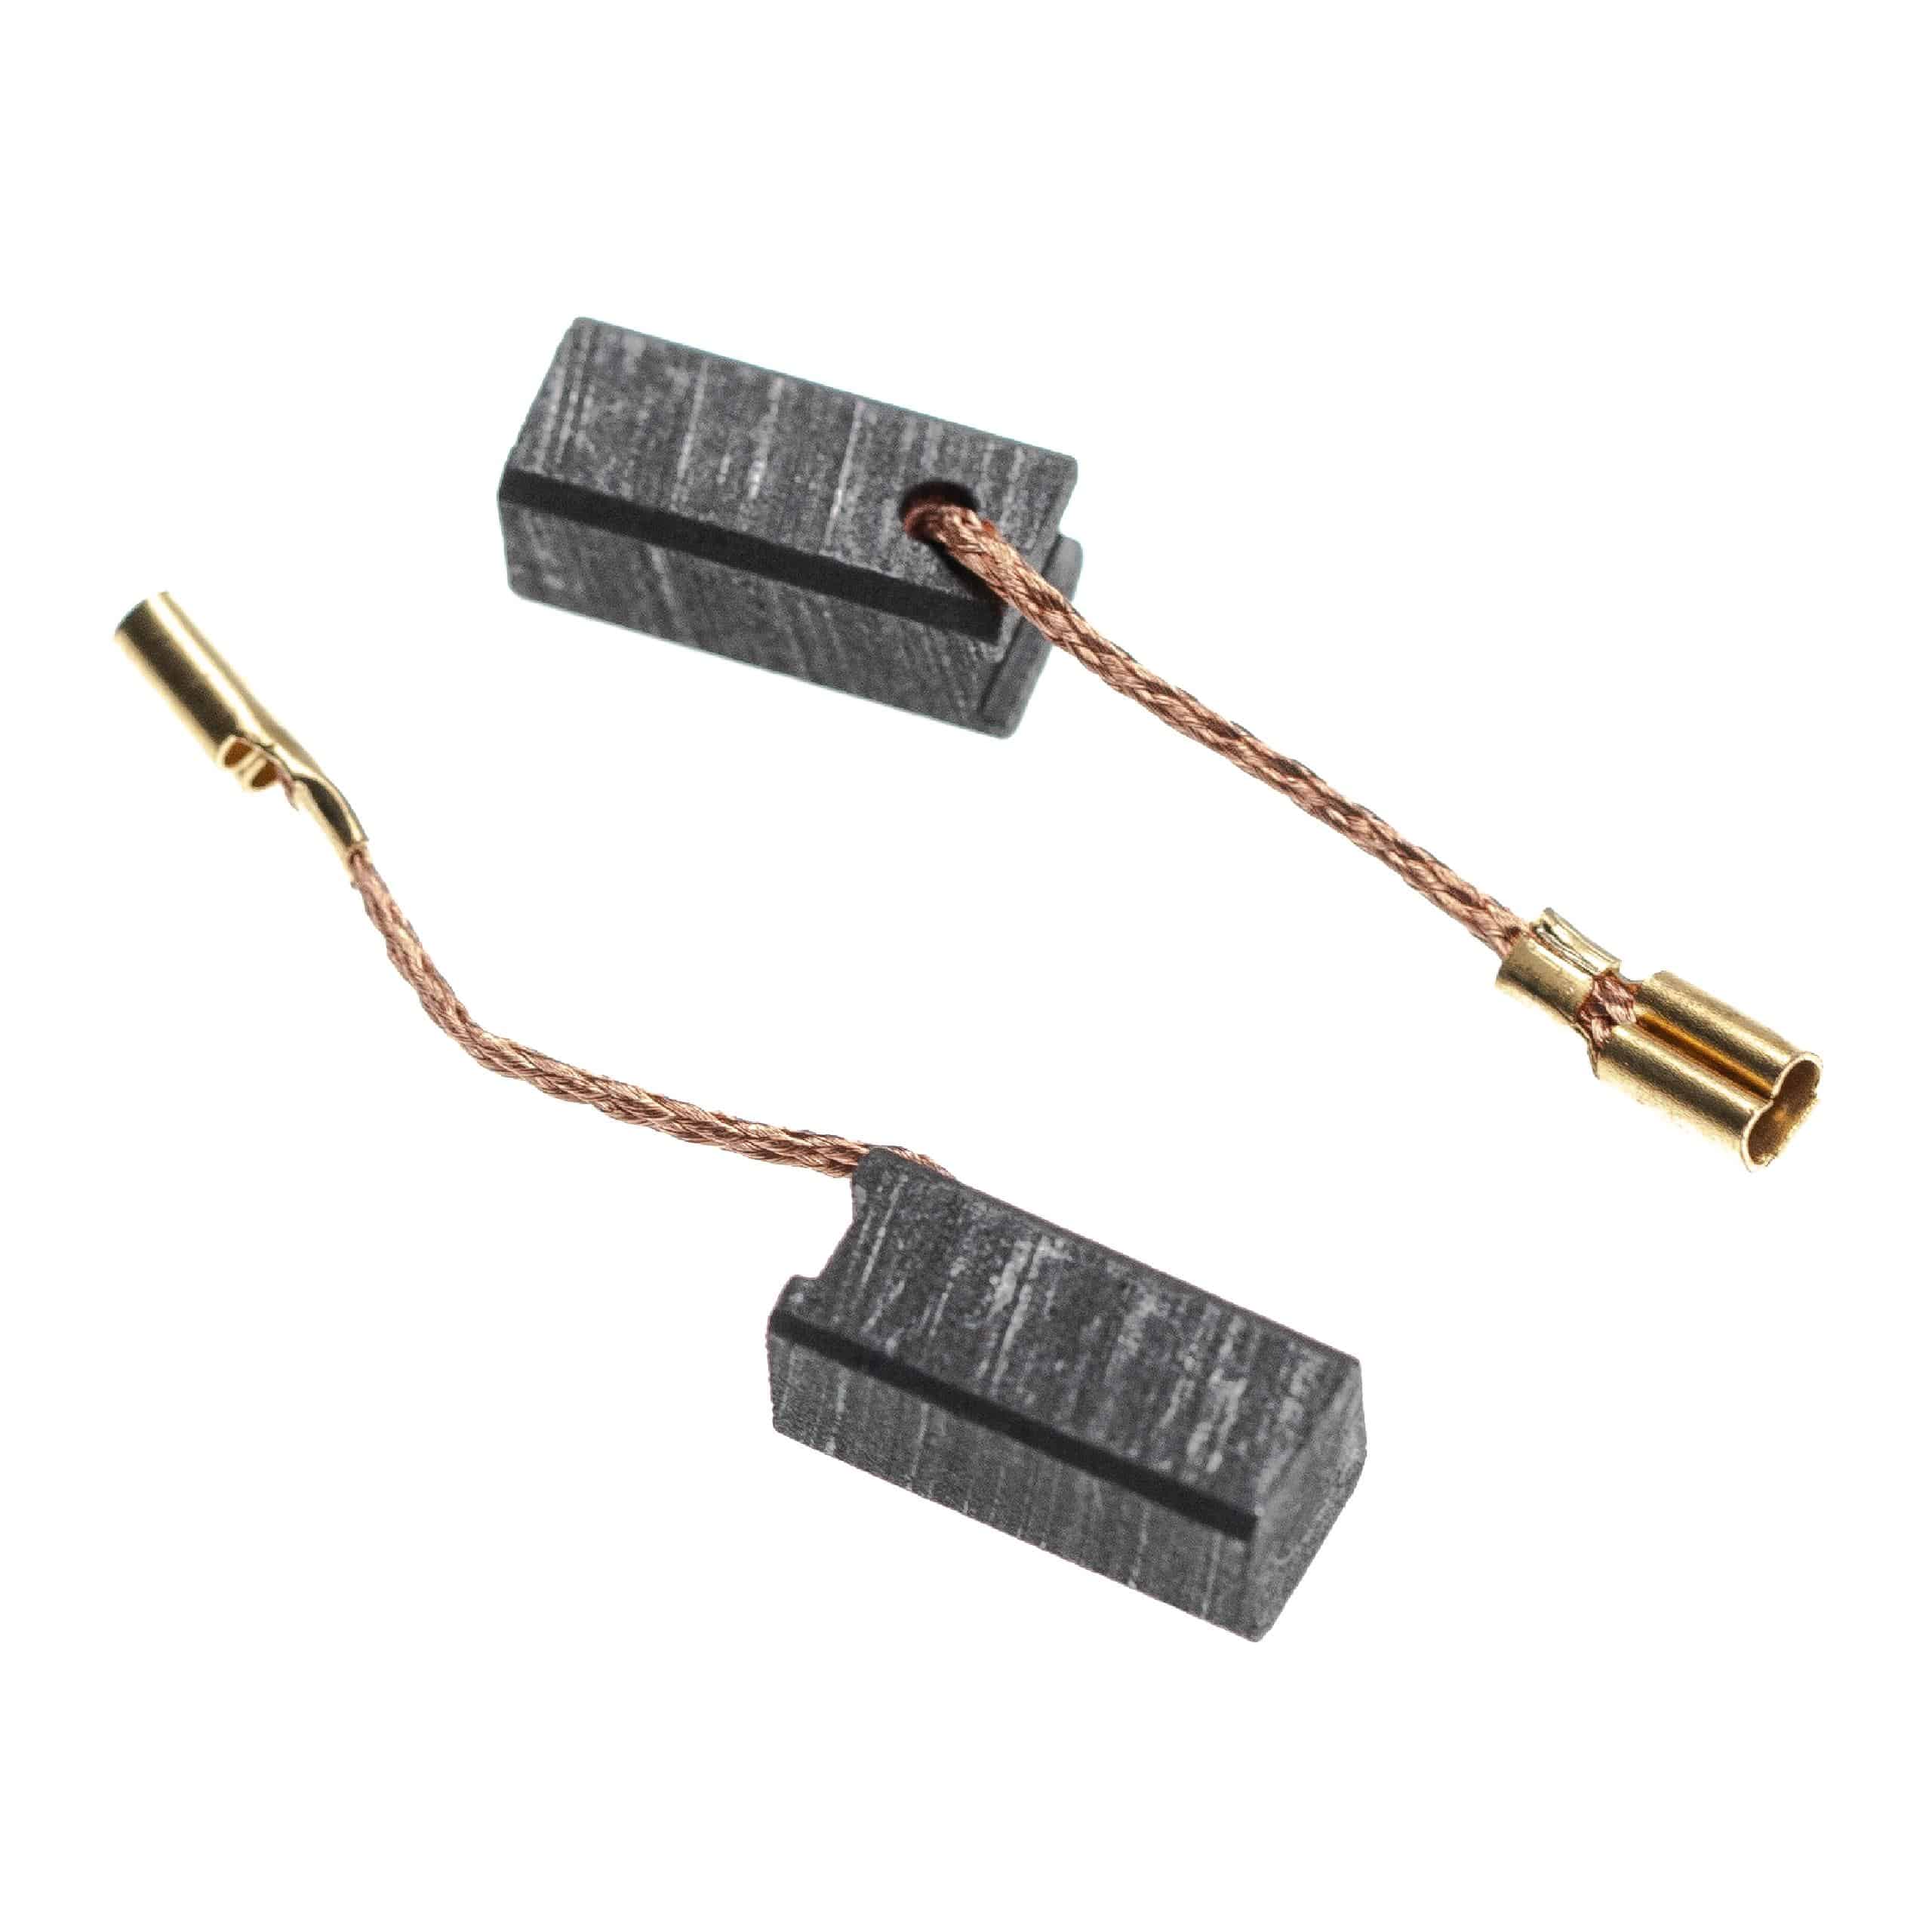 2x Carbon Brush as Replacement for Metabo 20-008 Electric Power Tools + Angled Connector, 15.3 x 5 x 6.3mm